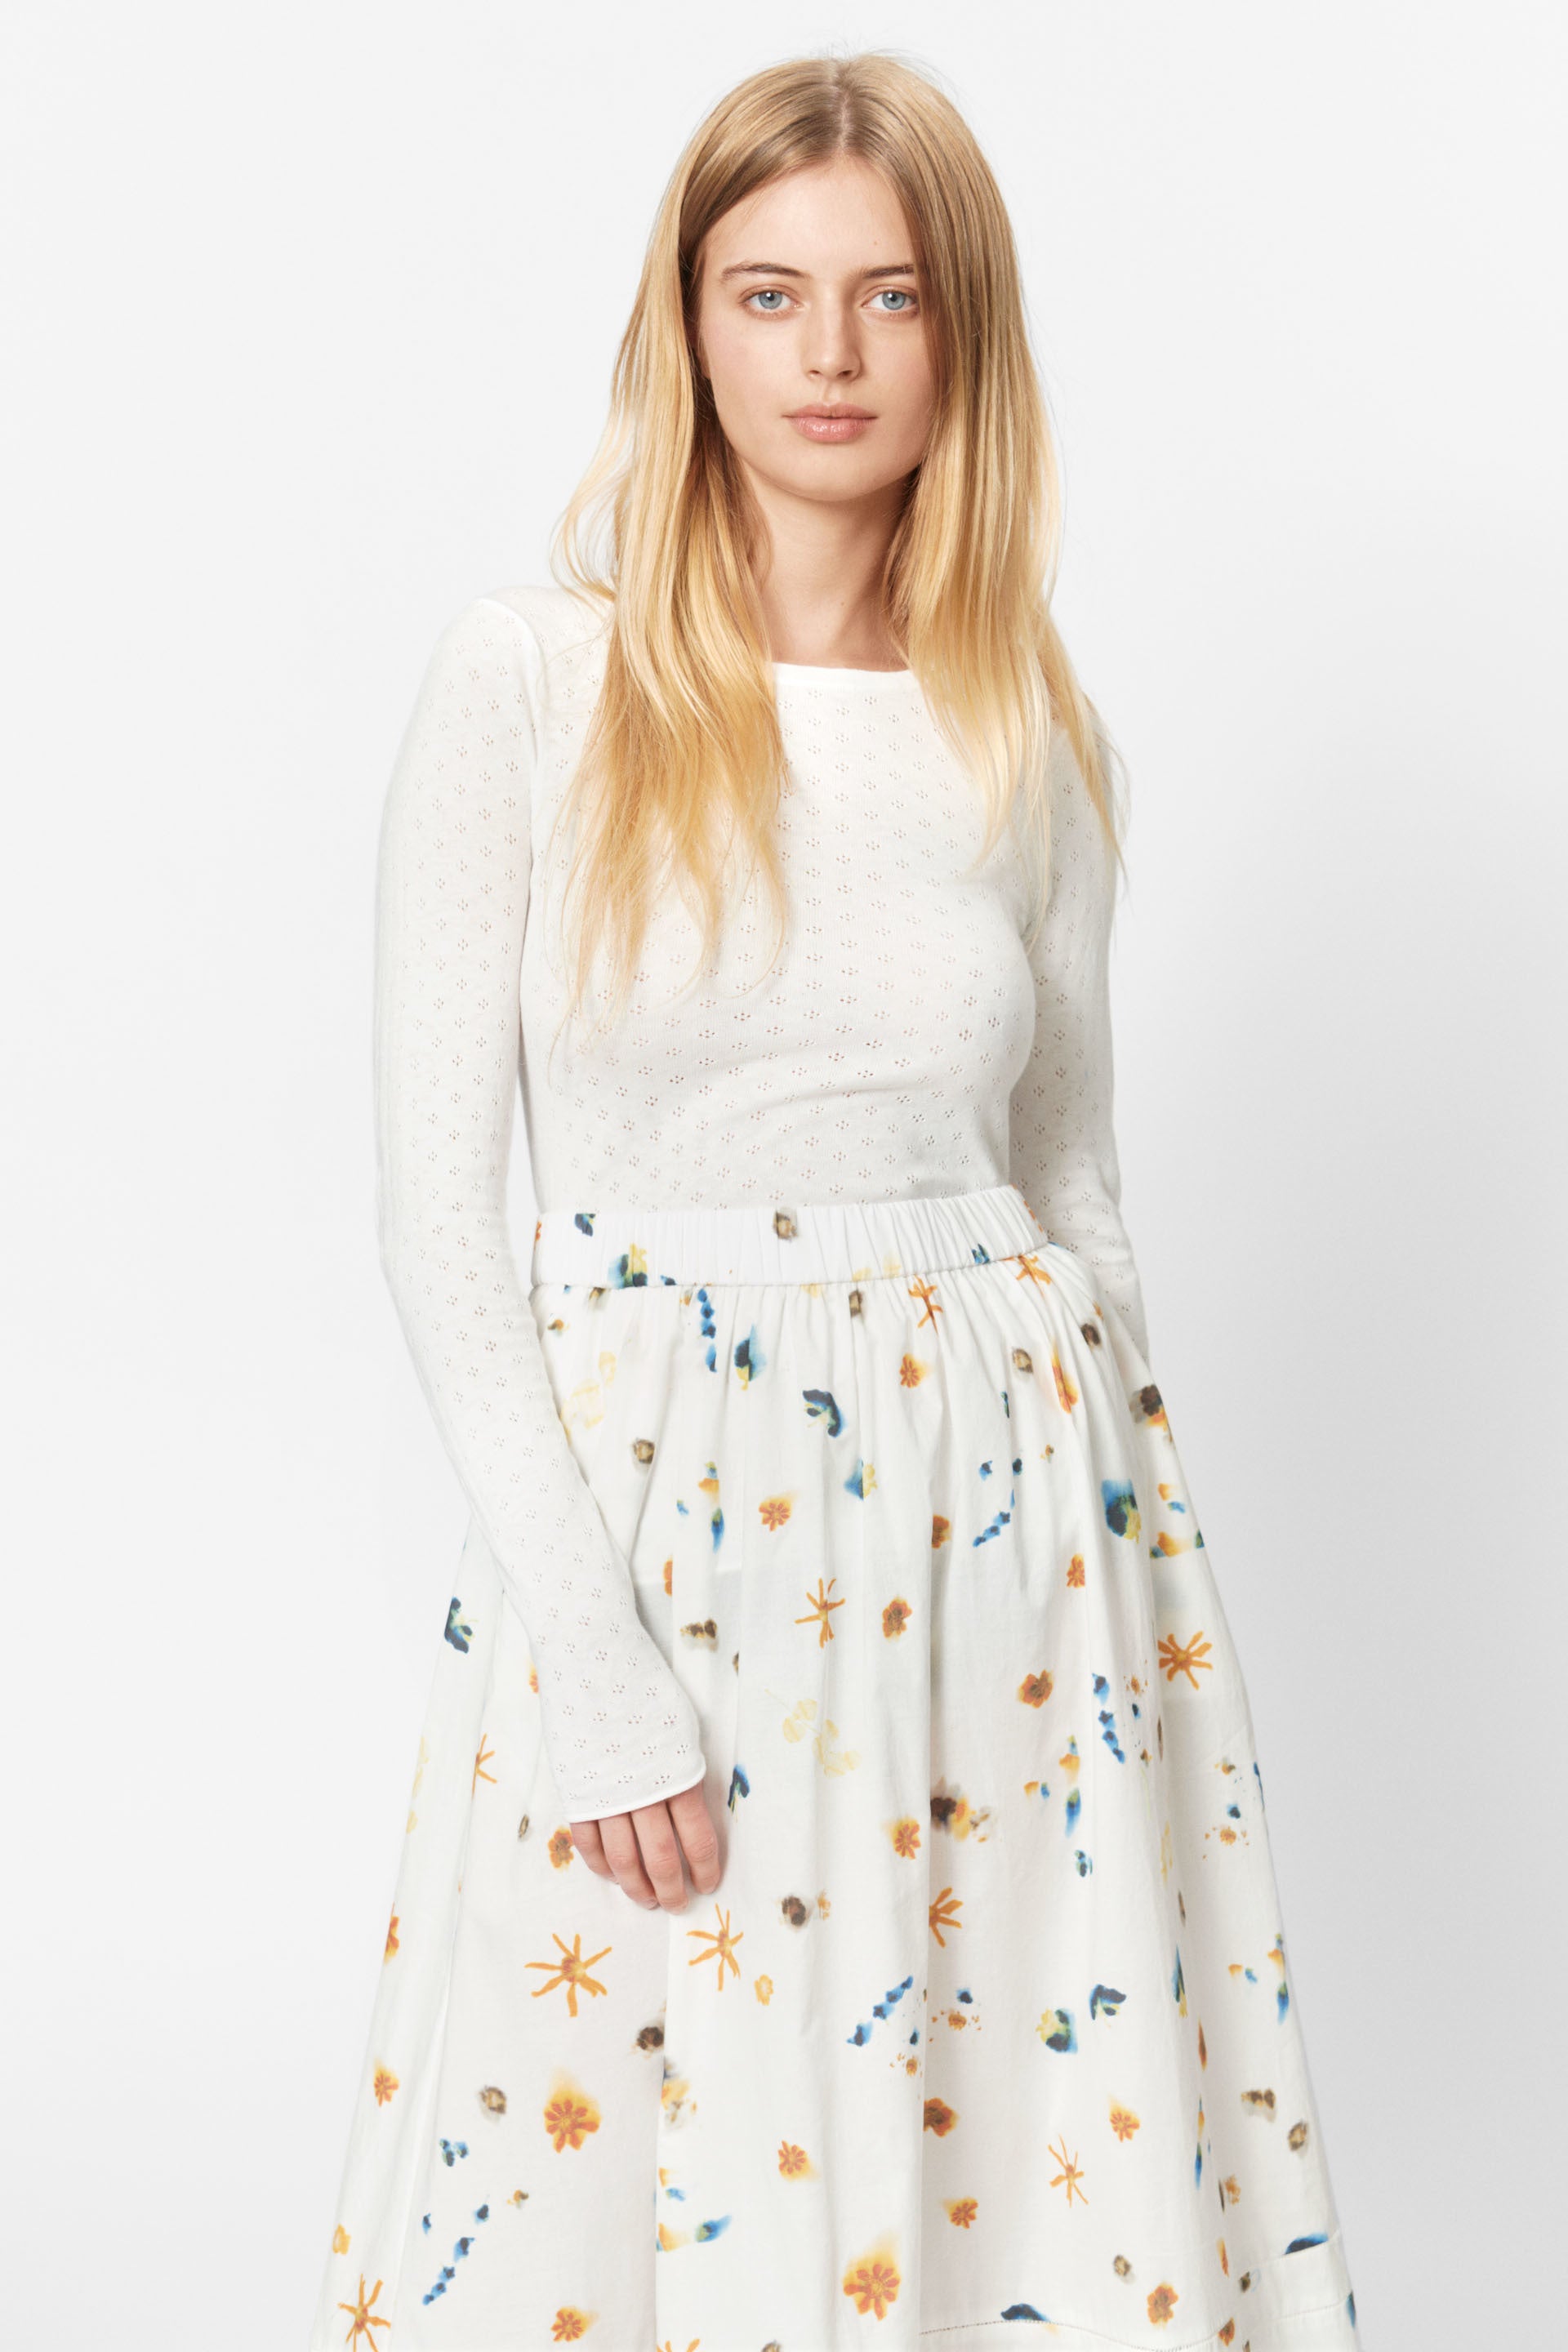 nué notes Bowie Skirt SKIRTS 103 Yellow Cream